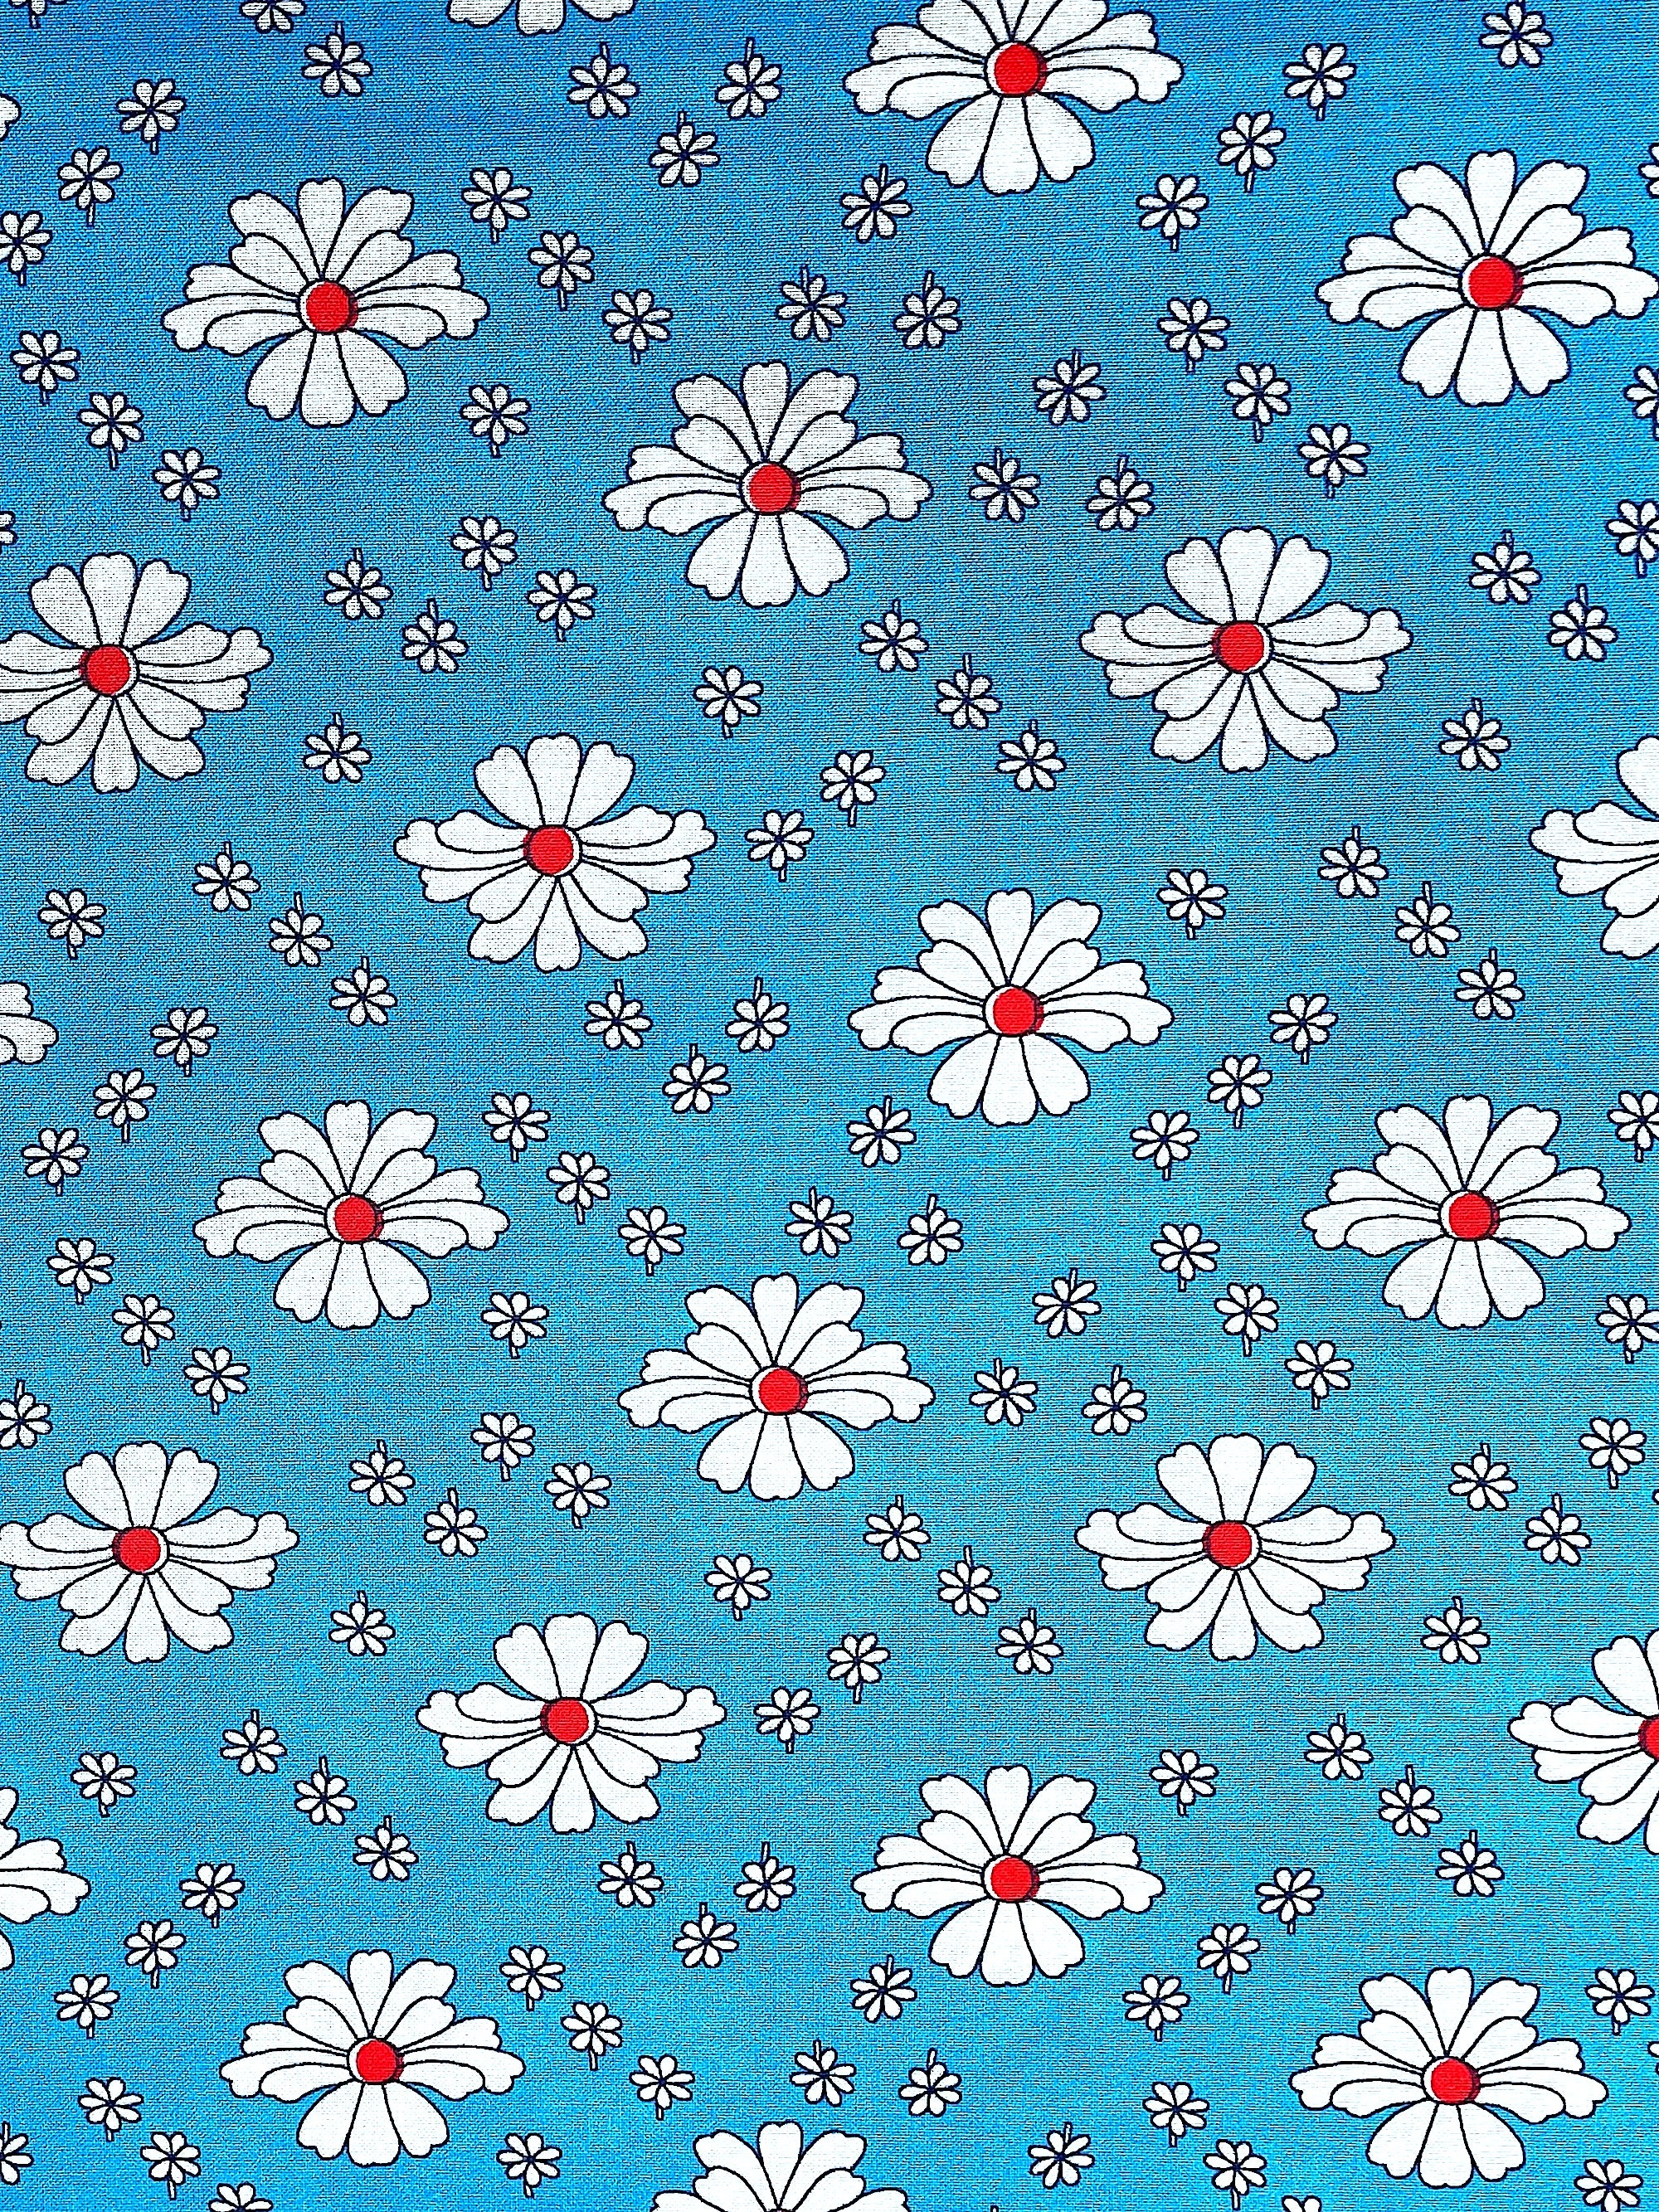 Blue cotton fabric covered with white flowers with red centers.